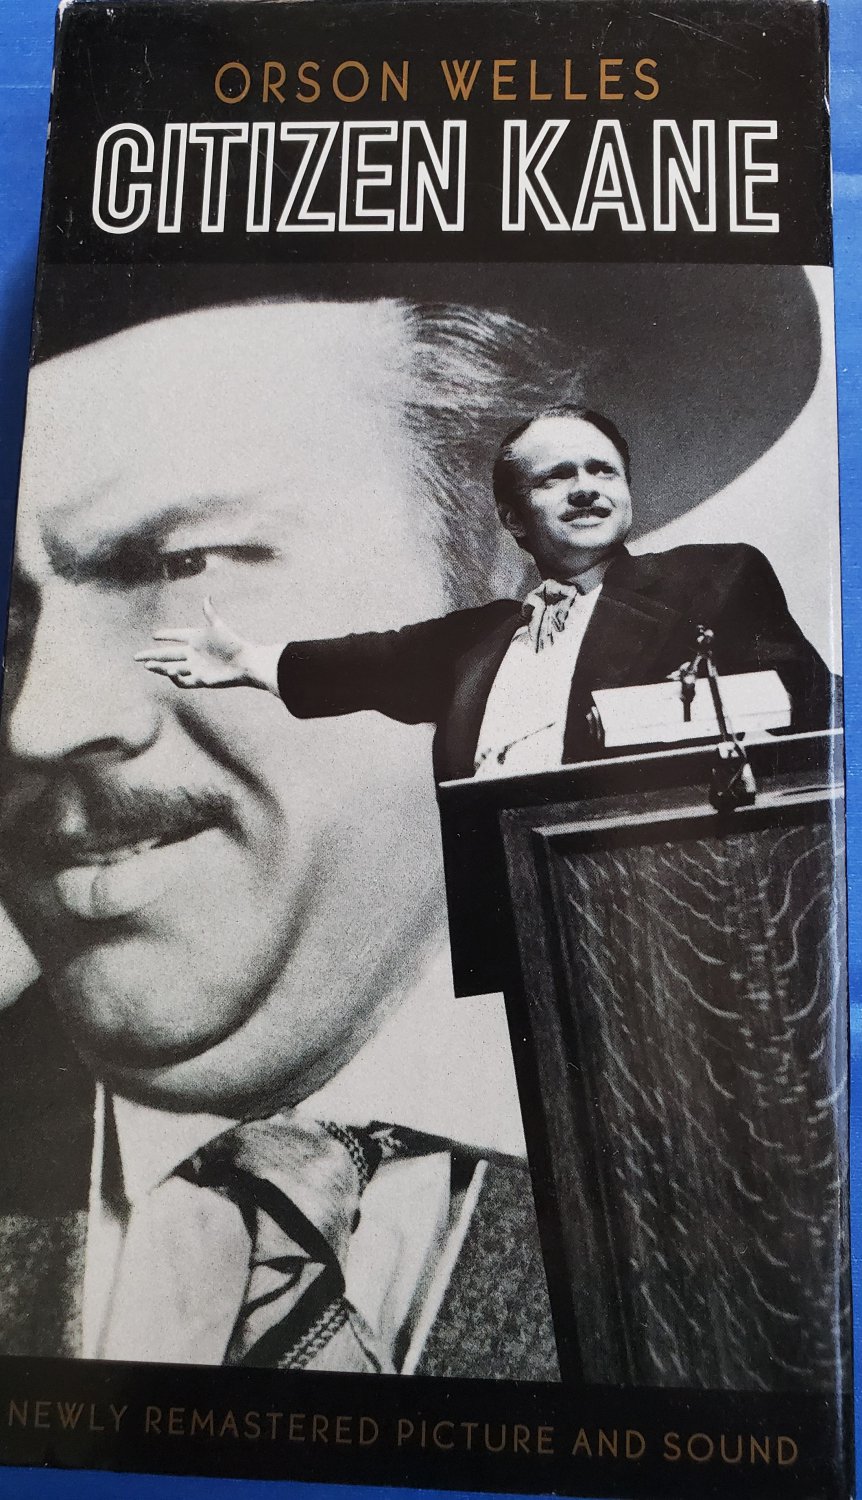 Citizen Kane Remastered Movie VHS Video Tape Orson Welles Black and White